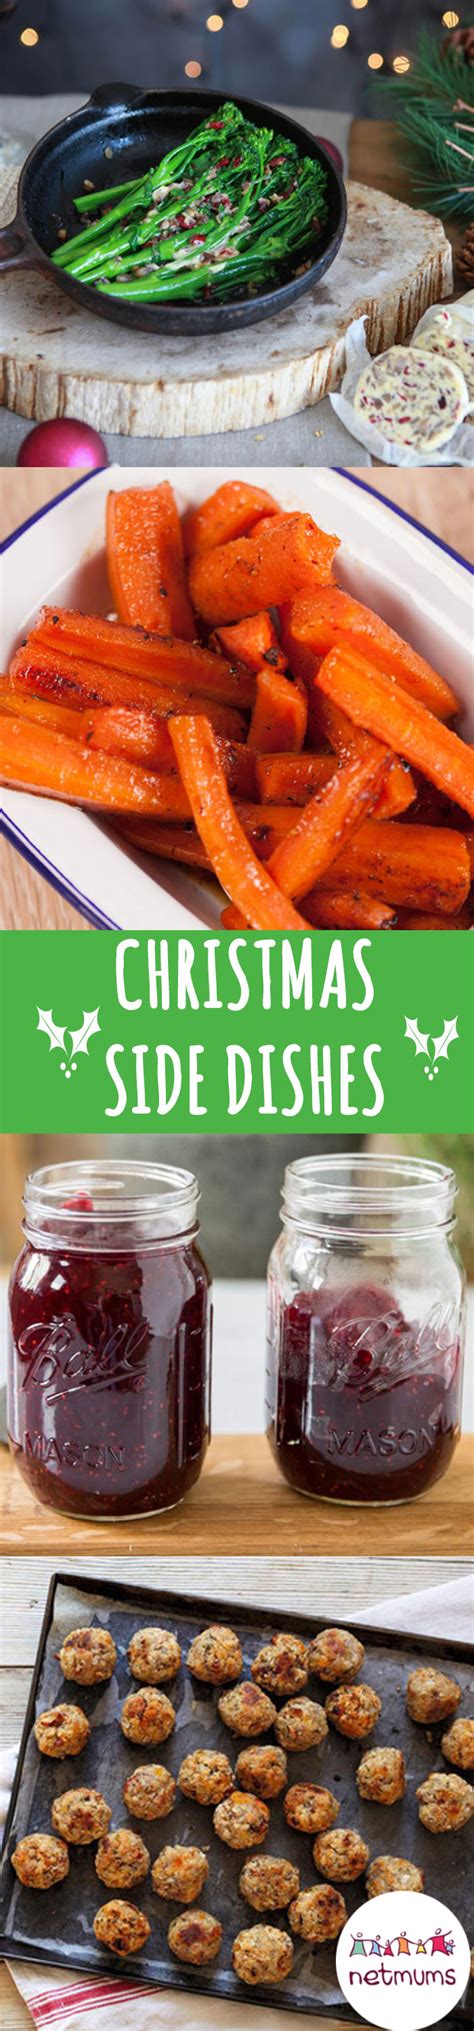 Delicious and seasonable side dishes for christmas dinner. Easy Christmas vegetable and side dish ideas | Side dishes, Christmas side dishes, Dinner recipes